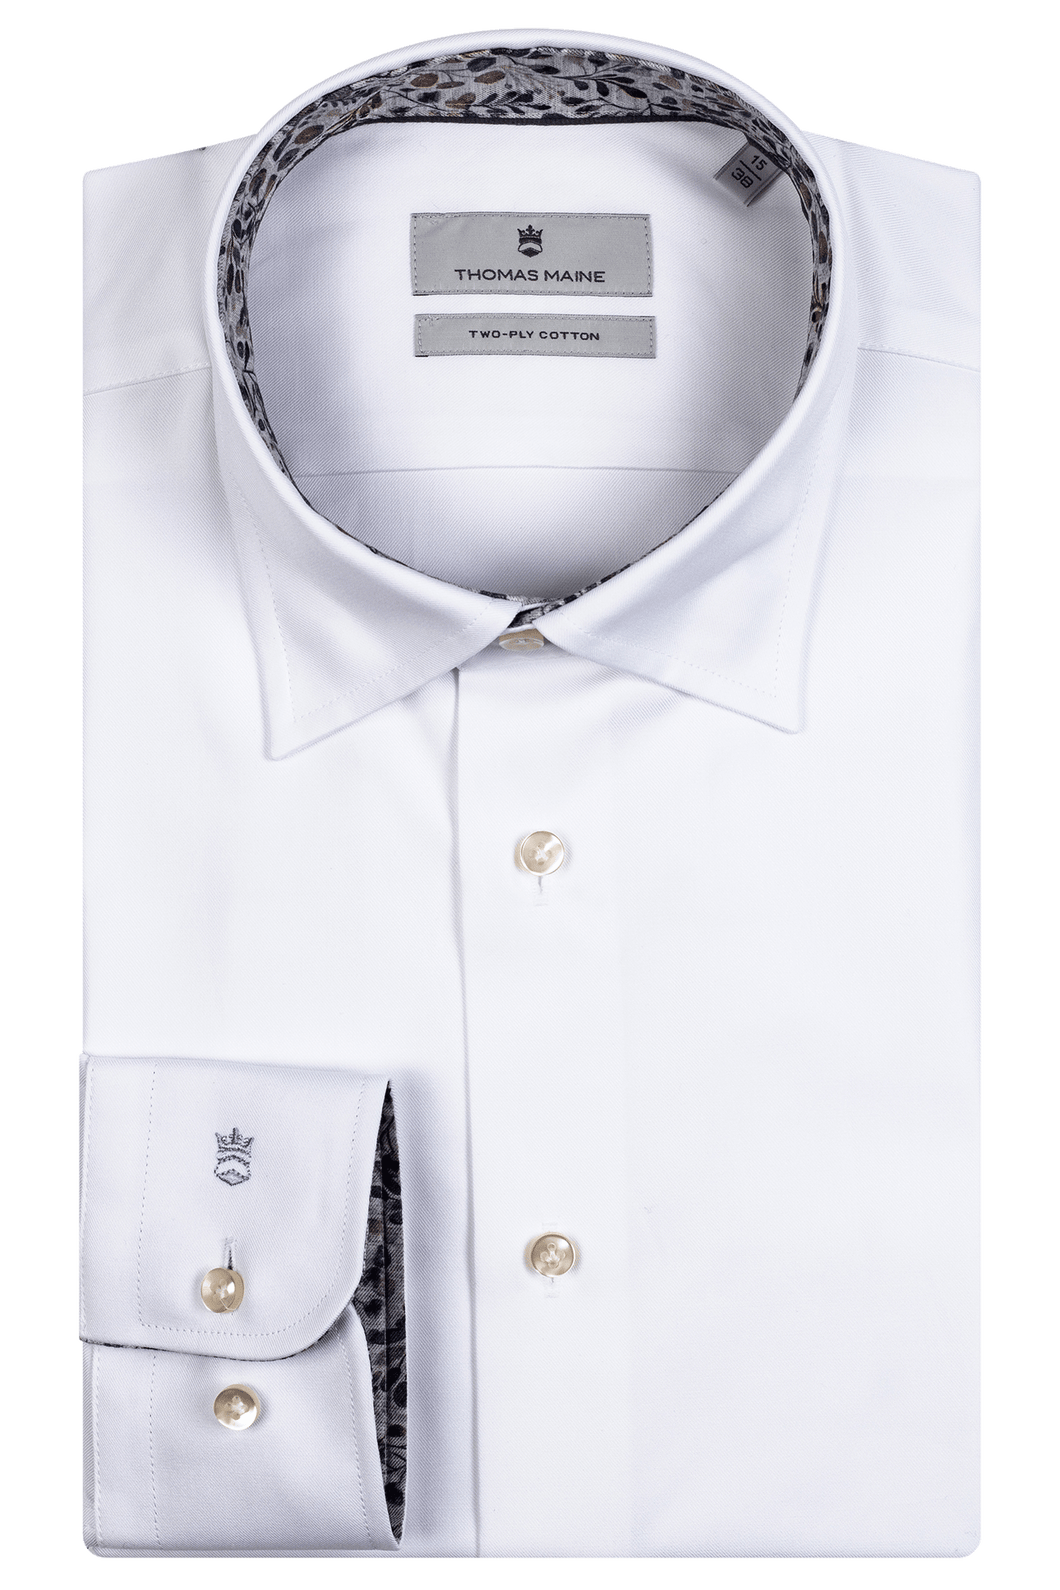 THOMAS MAINE White Shirt with Contrast Print Details